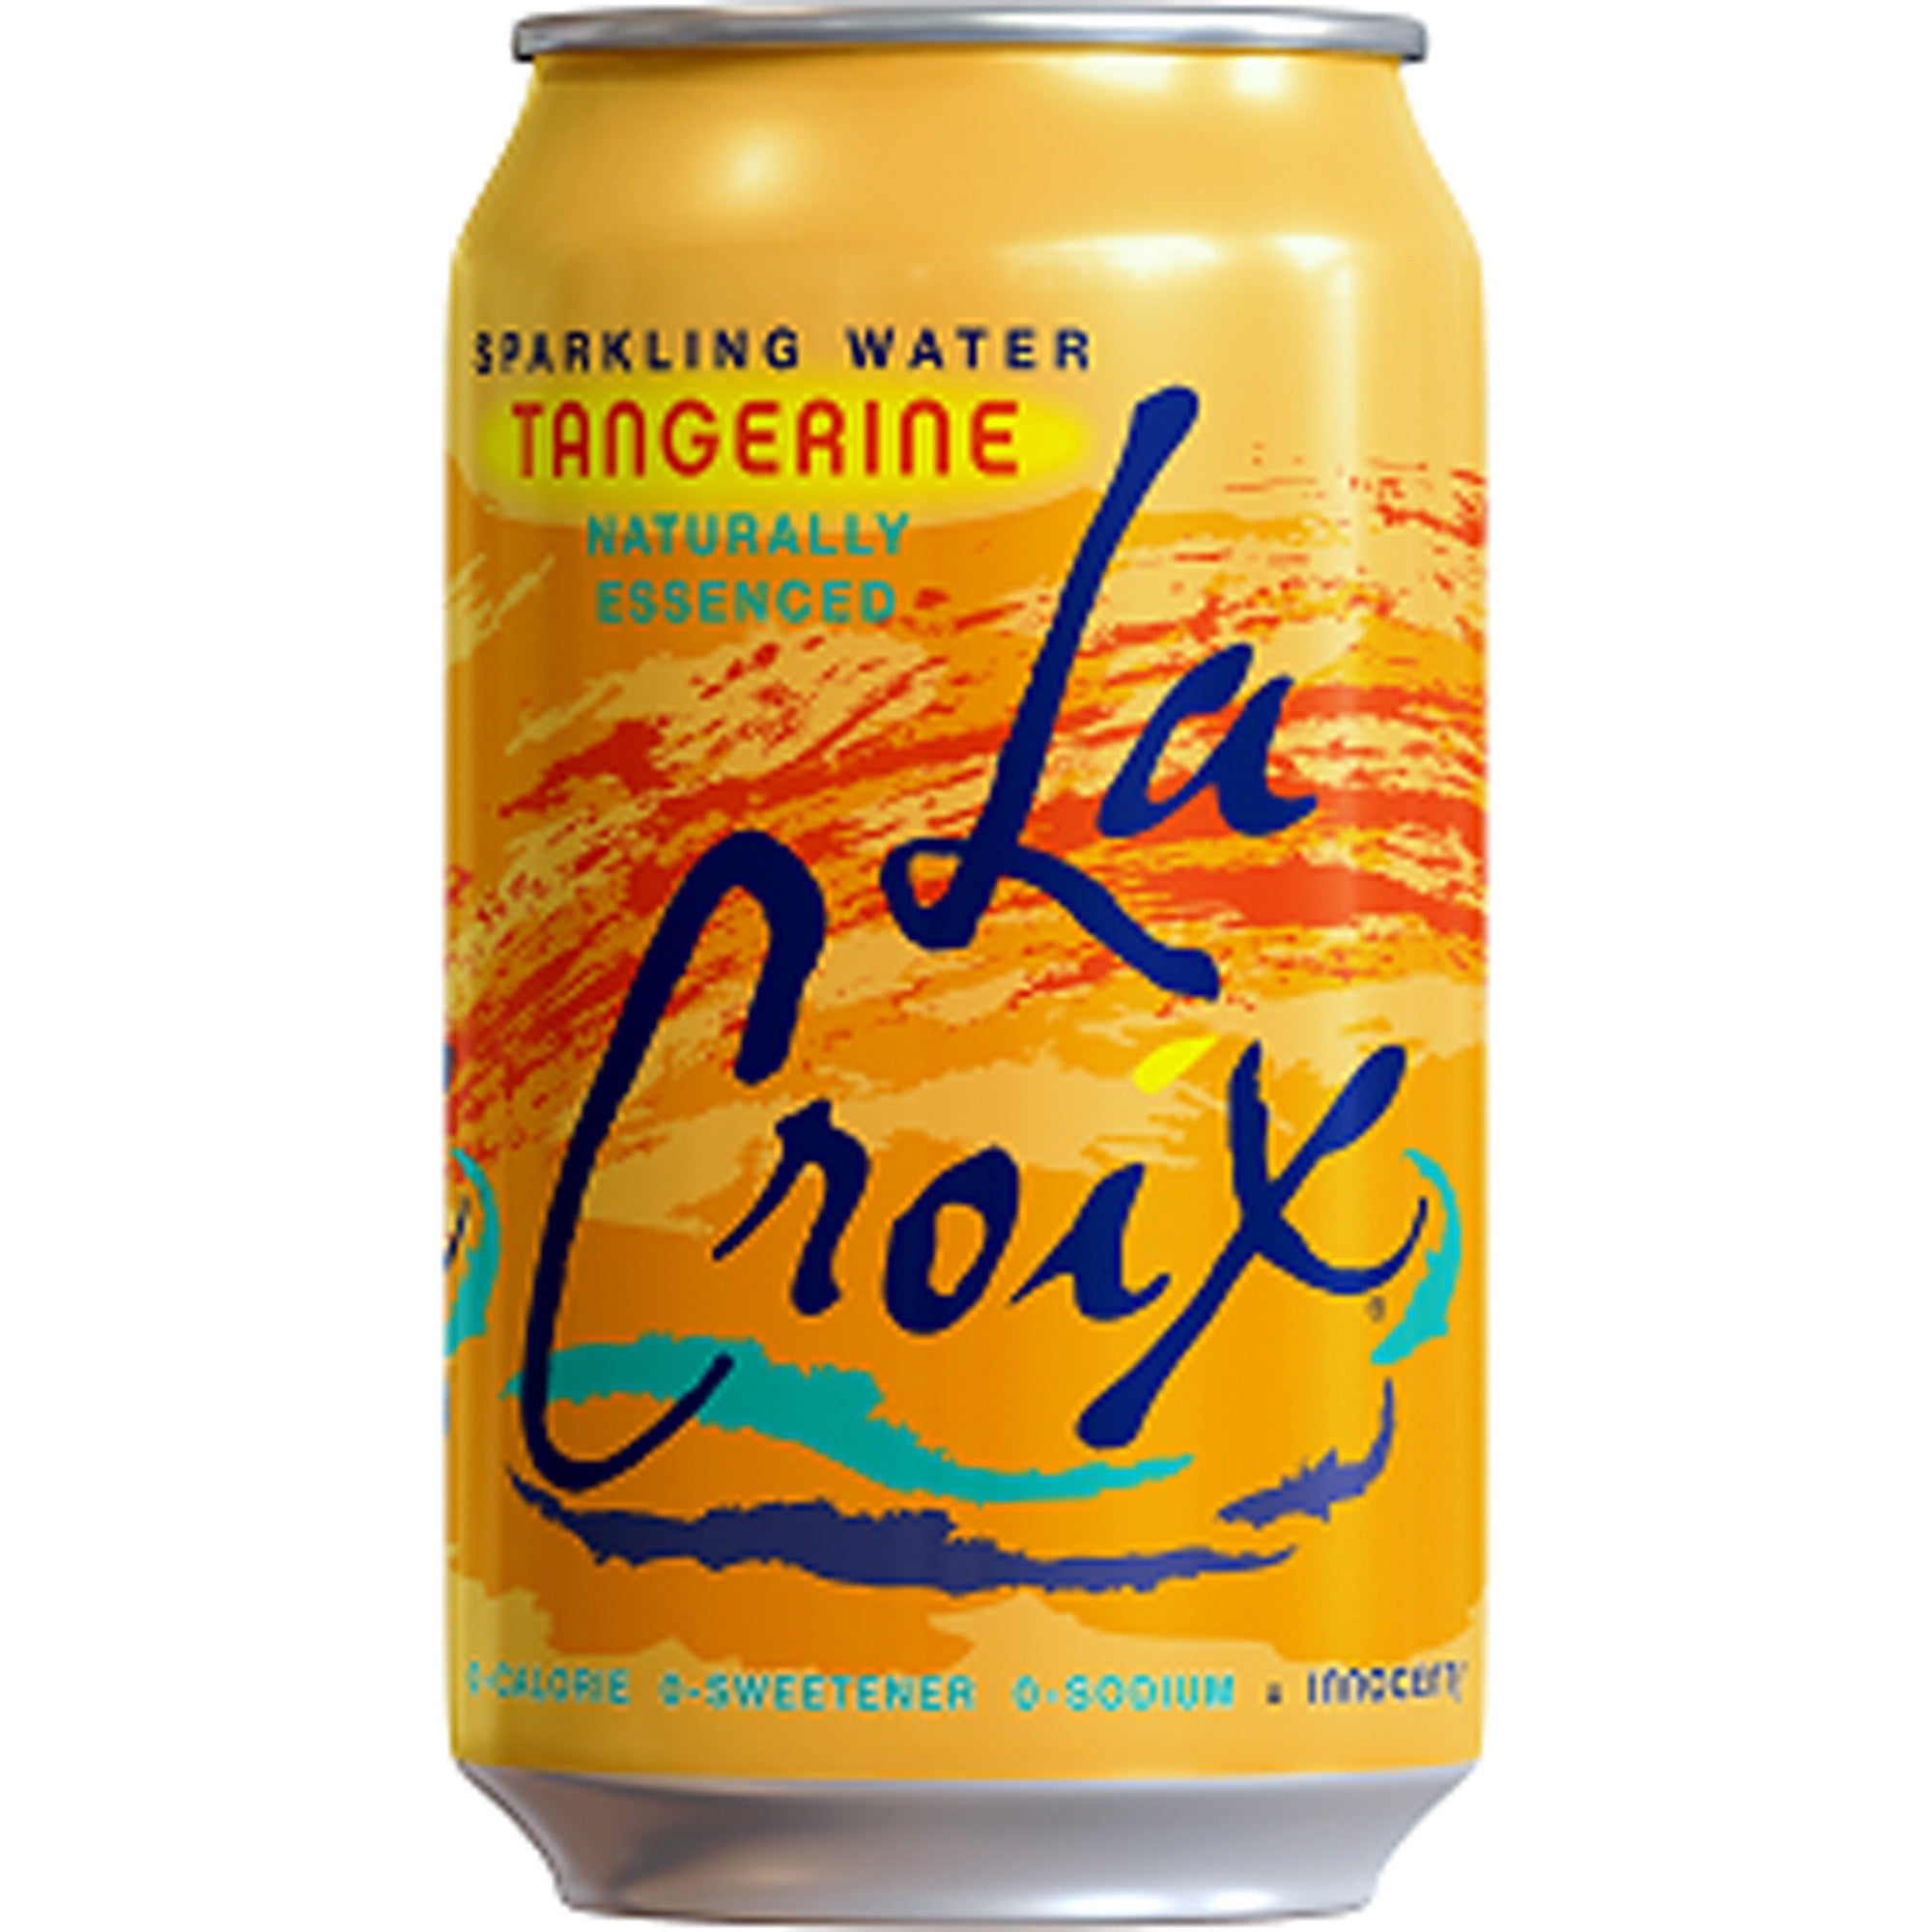 lacroix-tangerine-flavored-sparkling-water-ready-to-drink-12-fl-oz-355-ml-2-carton-can_lcx40106 - 1